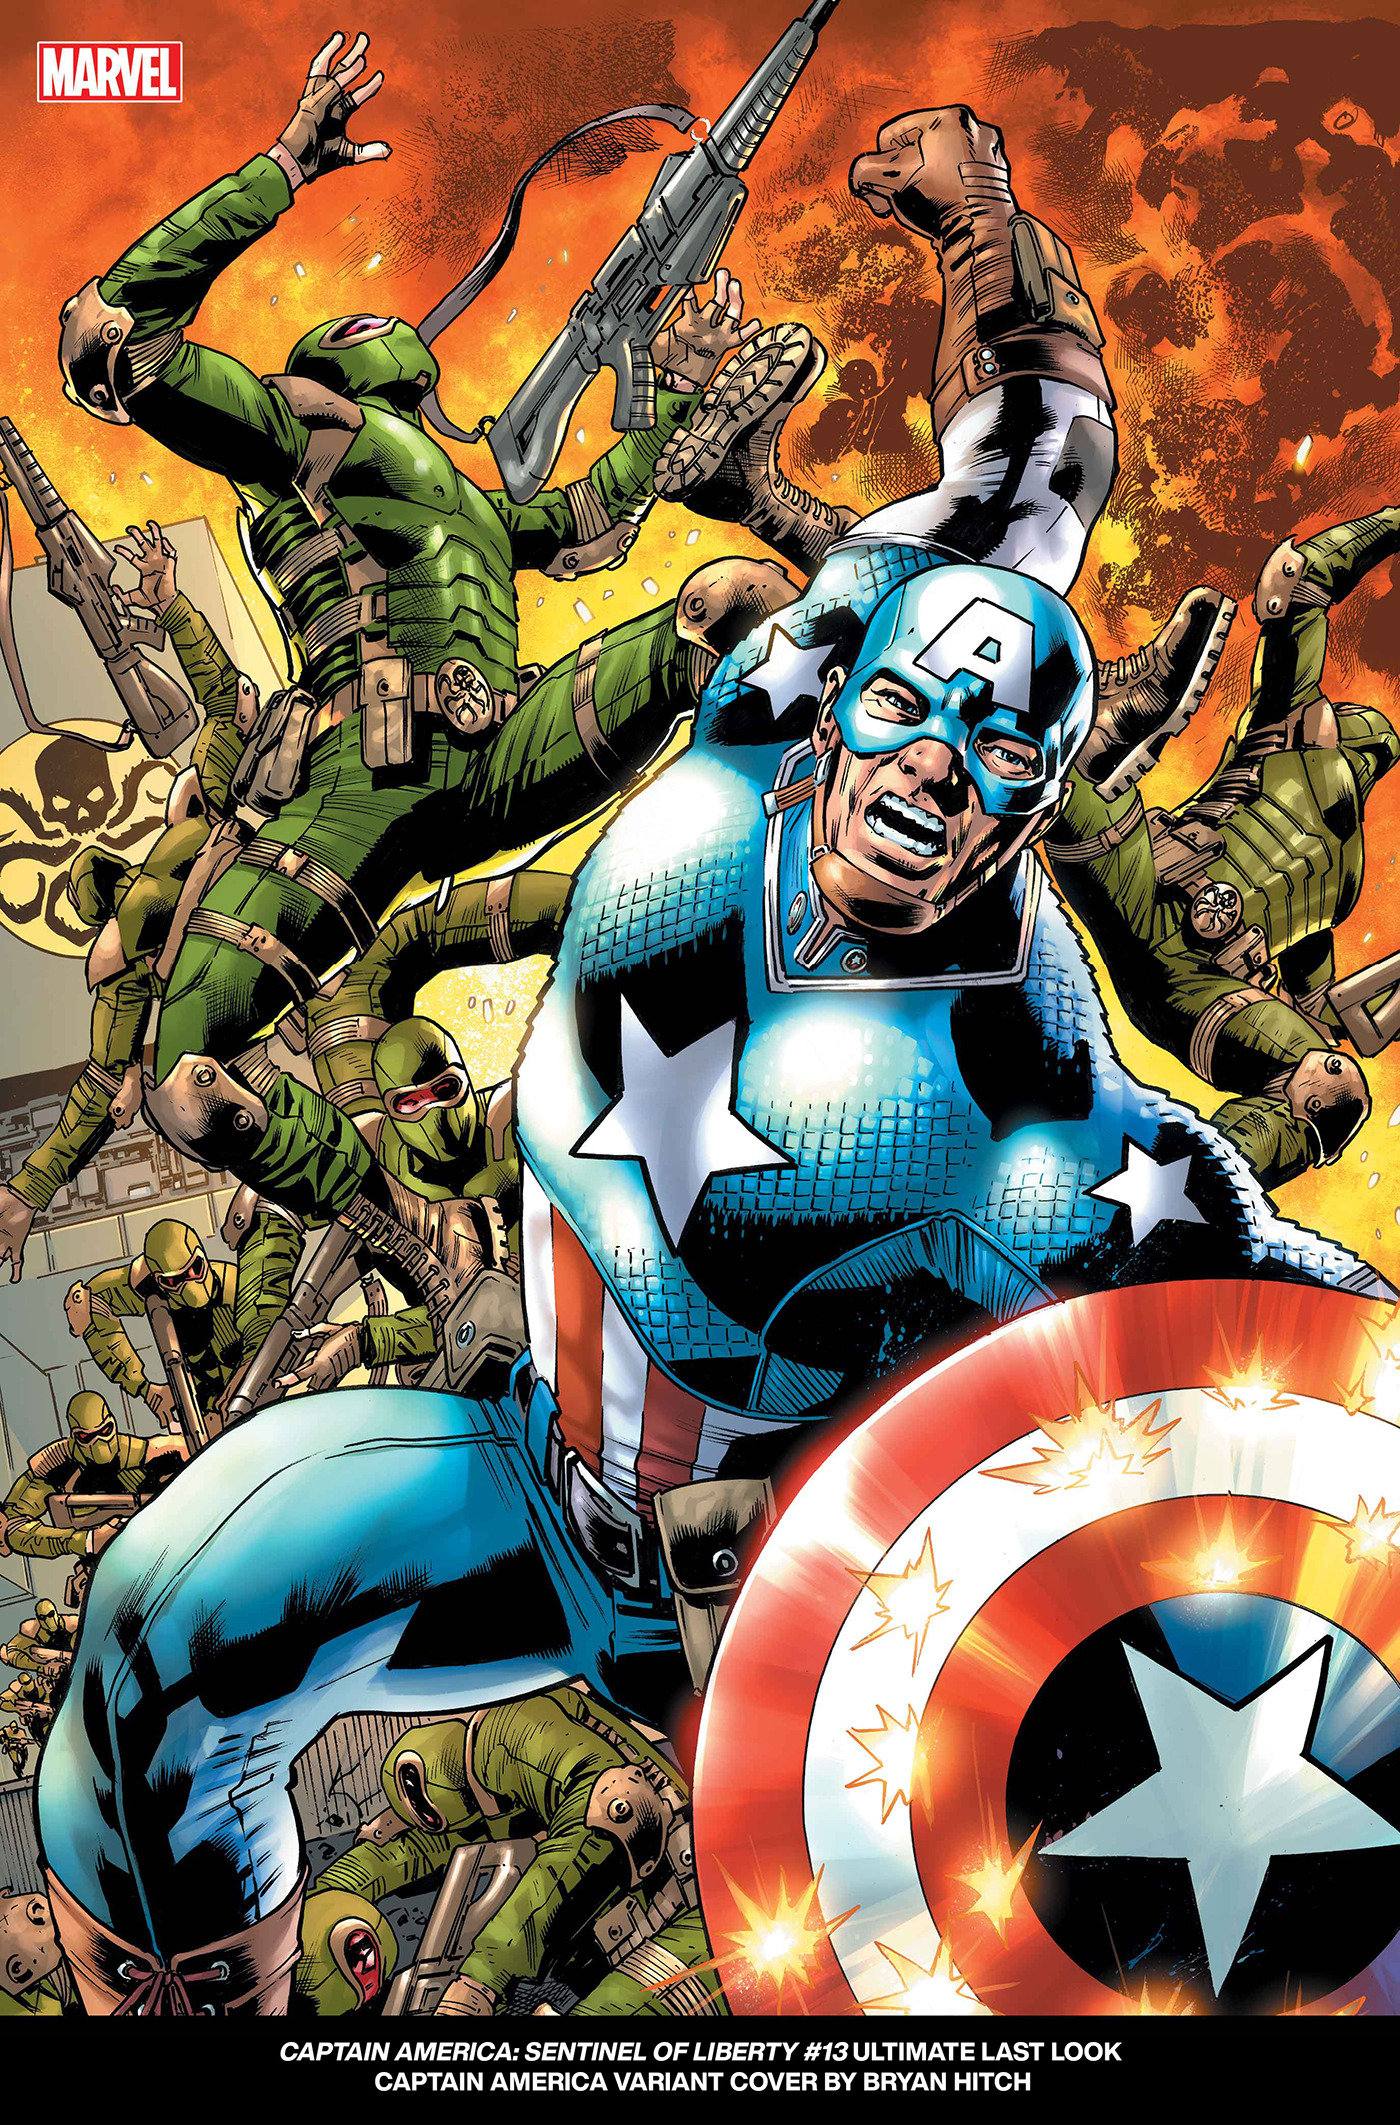 Captain America Sentinel of Liberty #13 Bryan Hitch Ultimate Last Look Variant